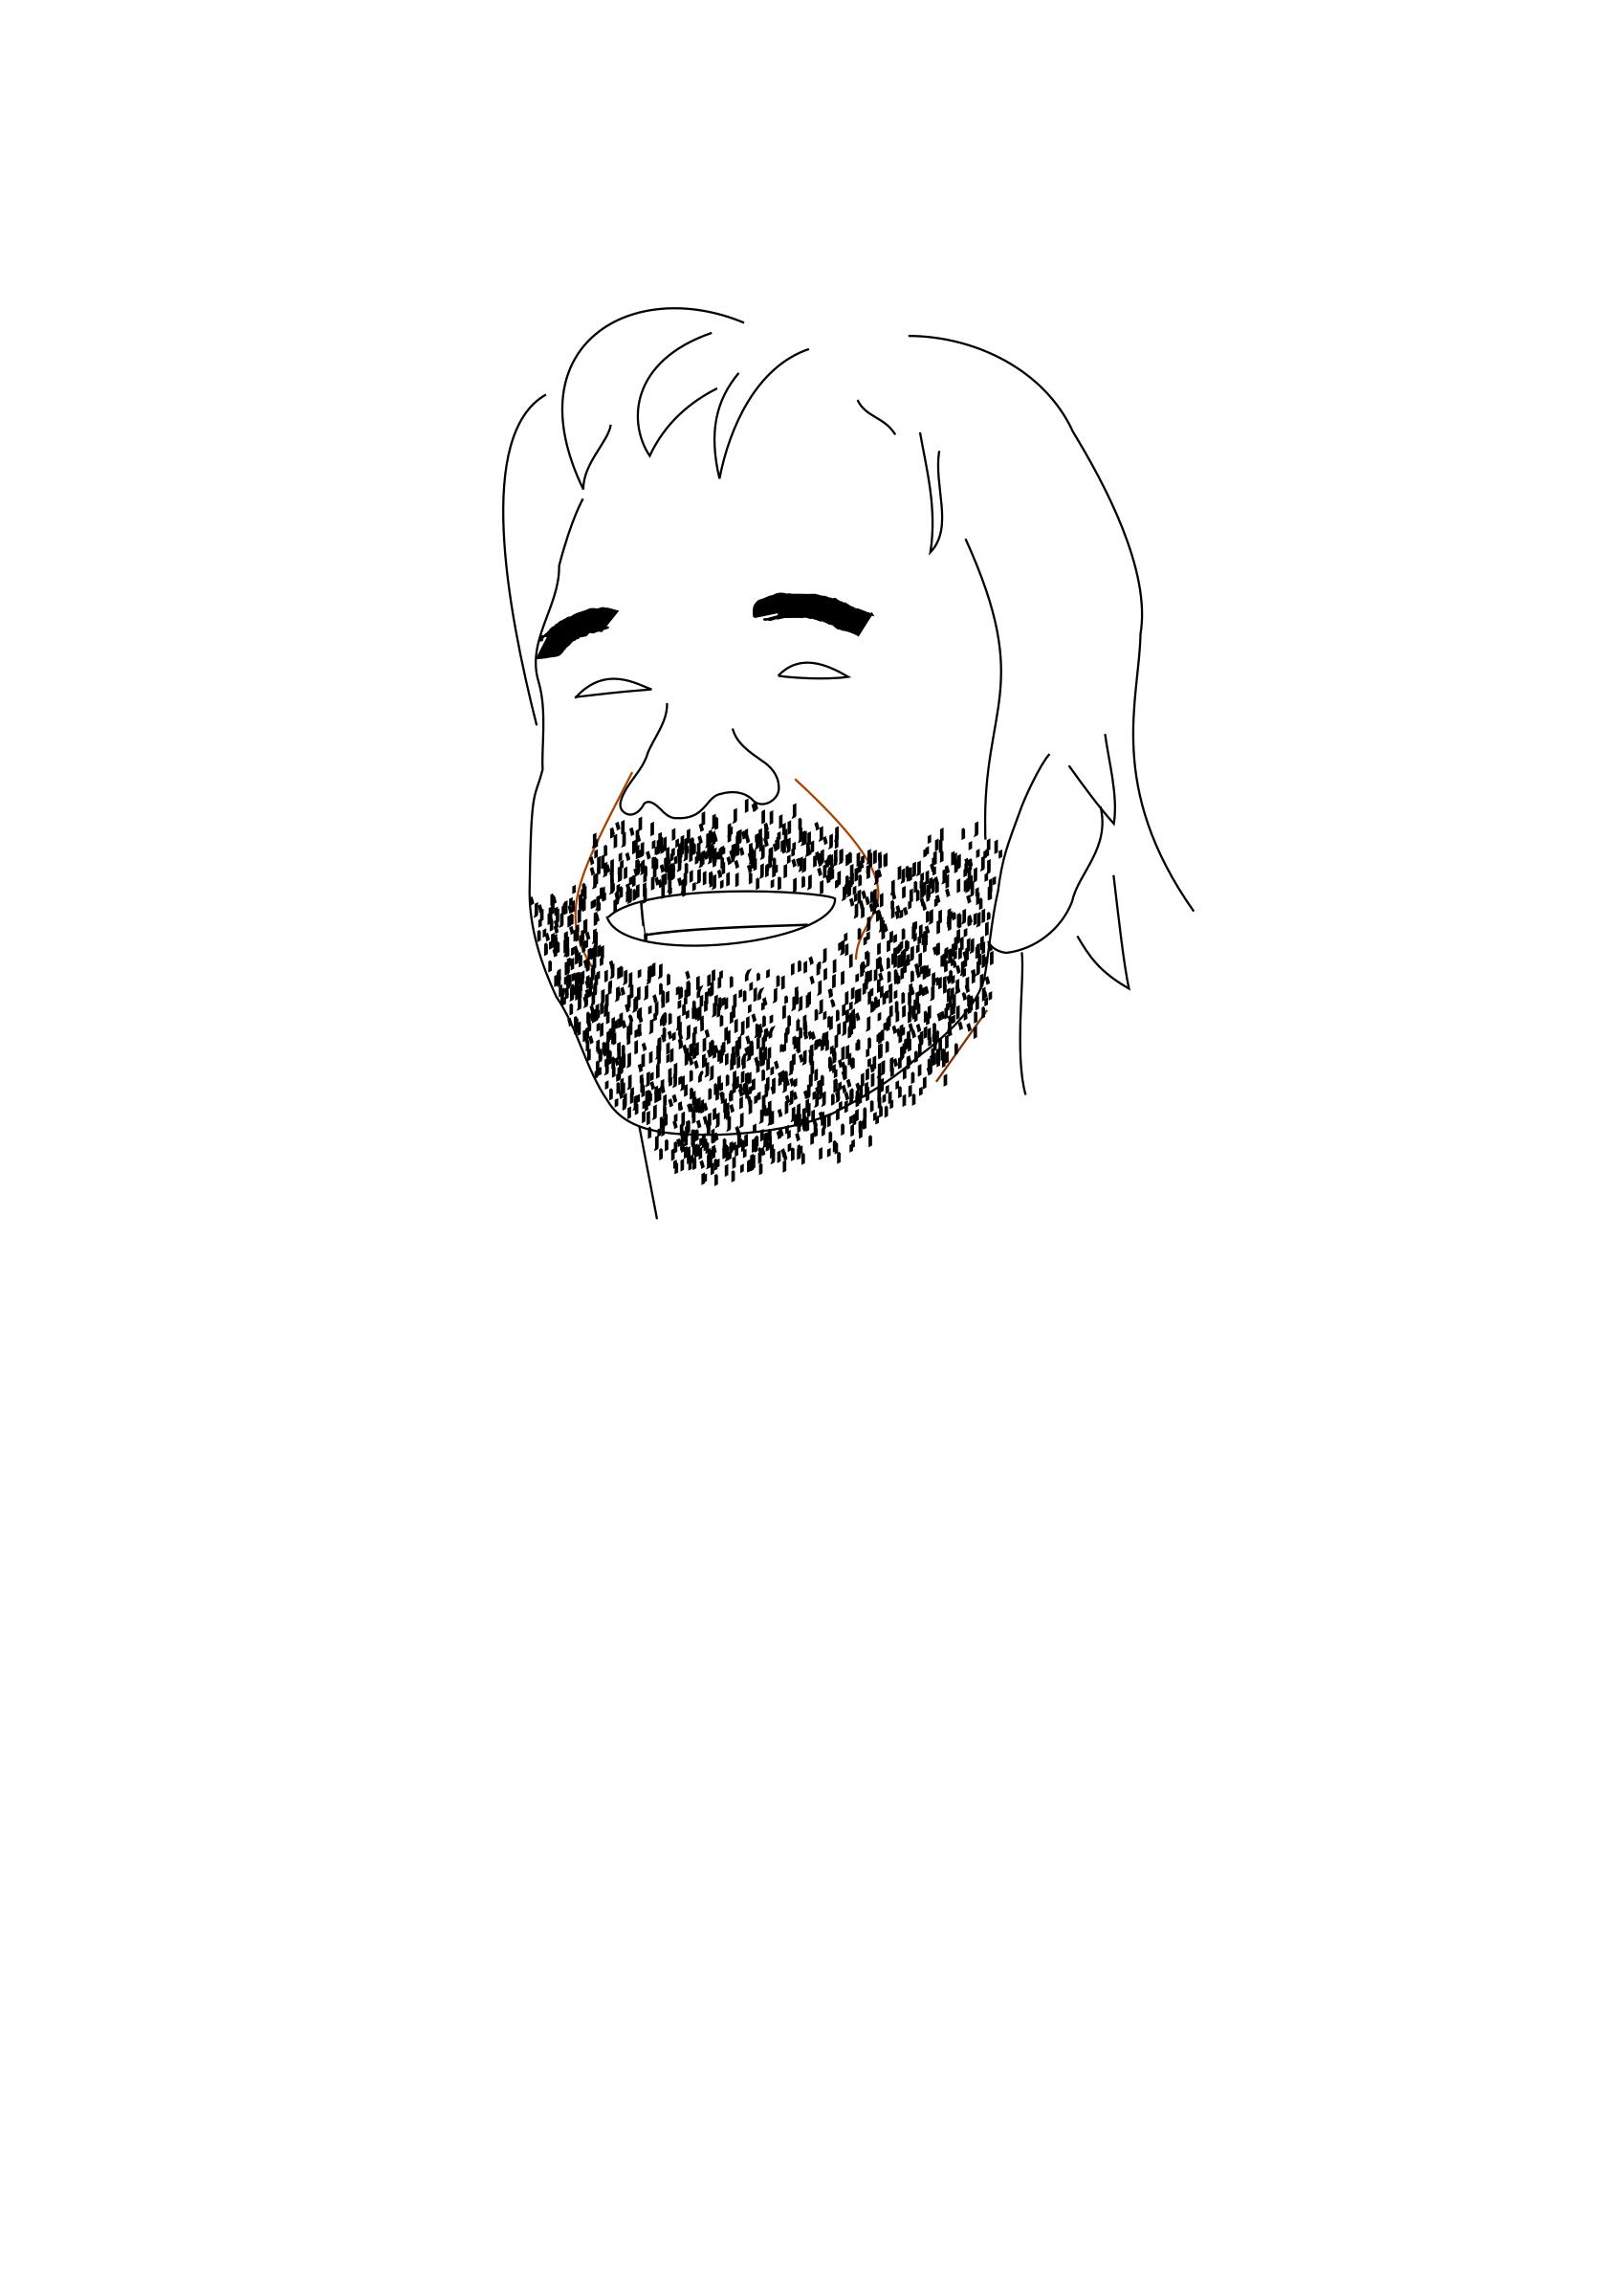 Chuck Norris smiling png